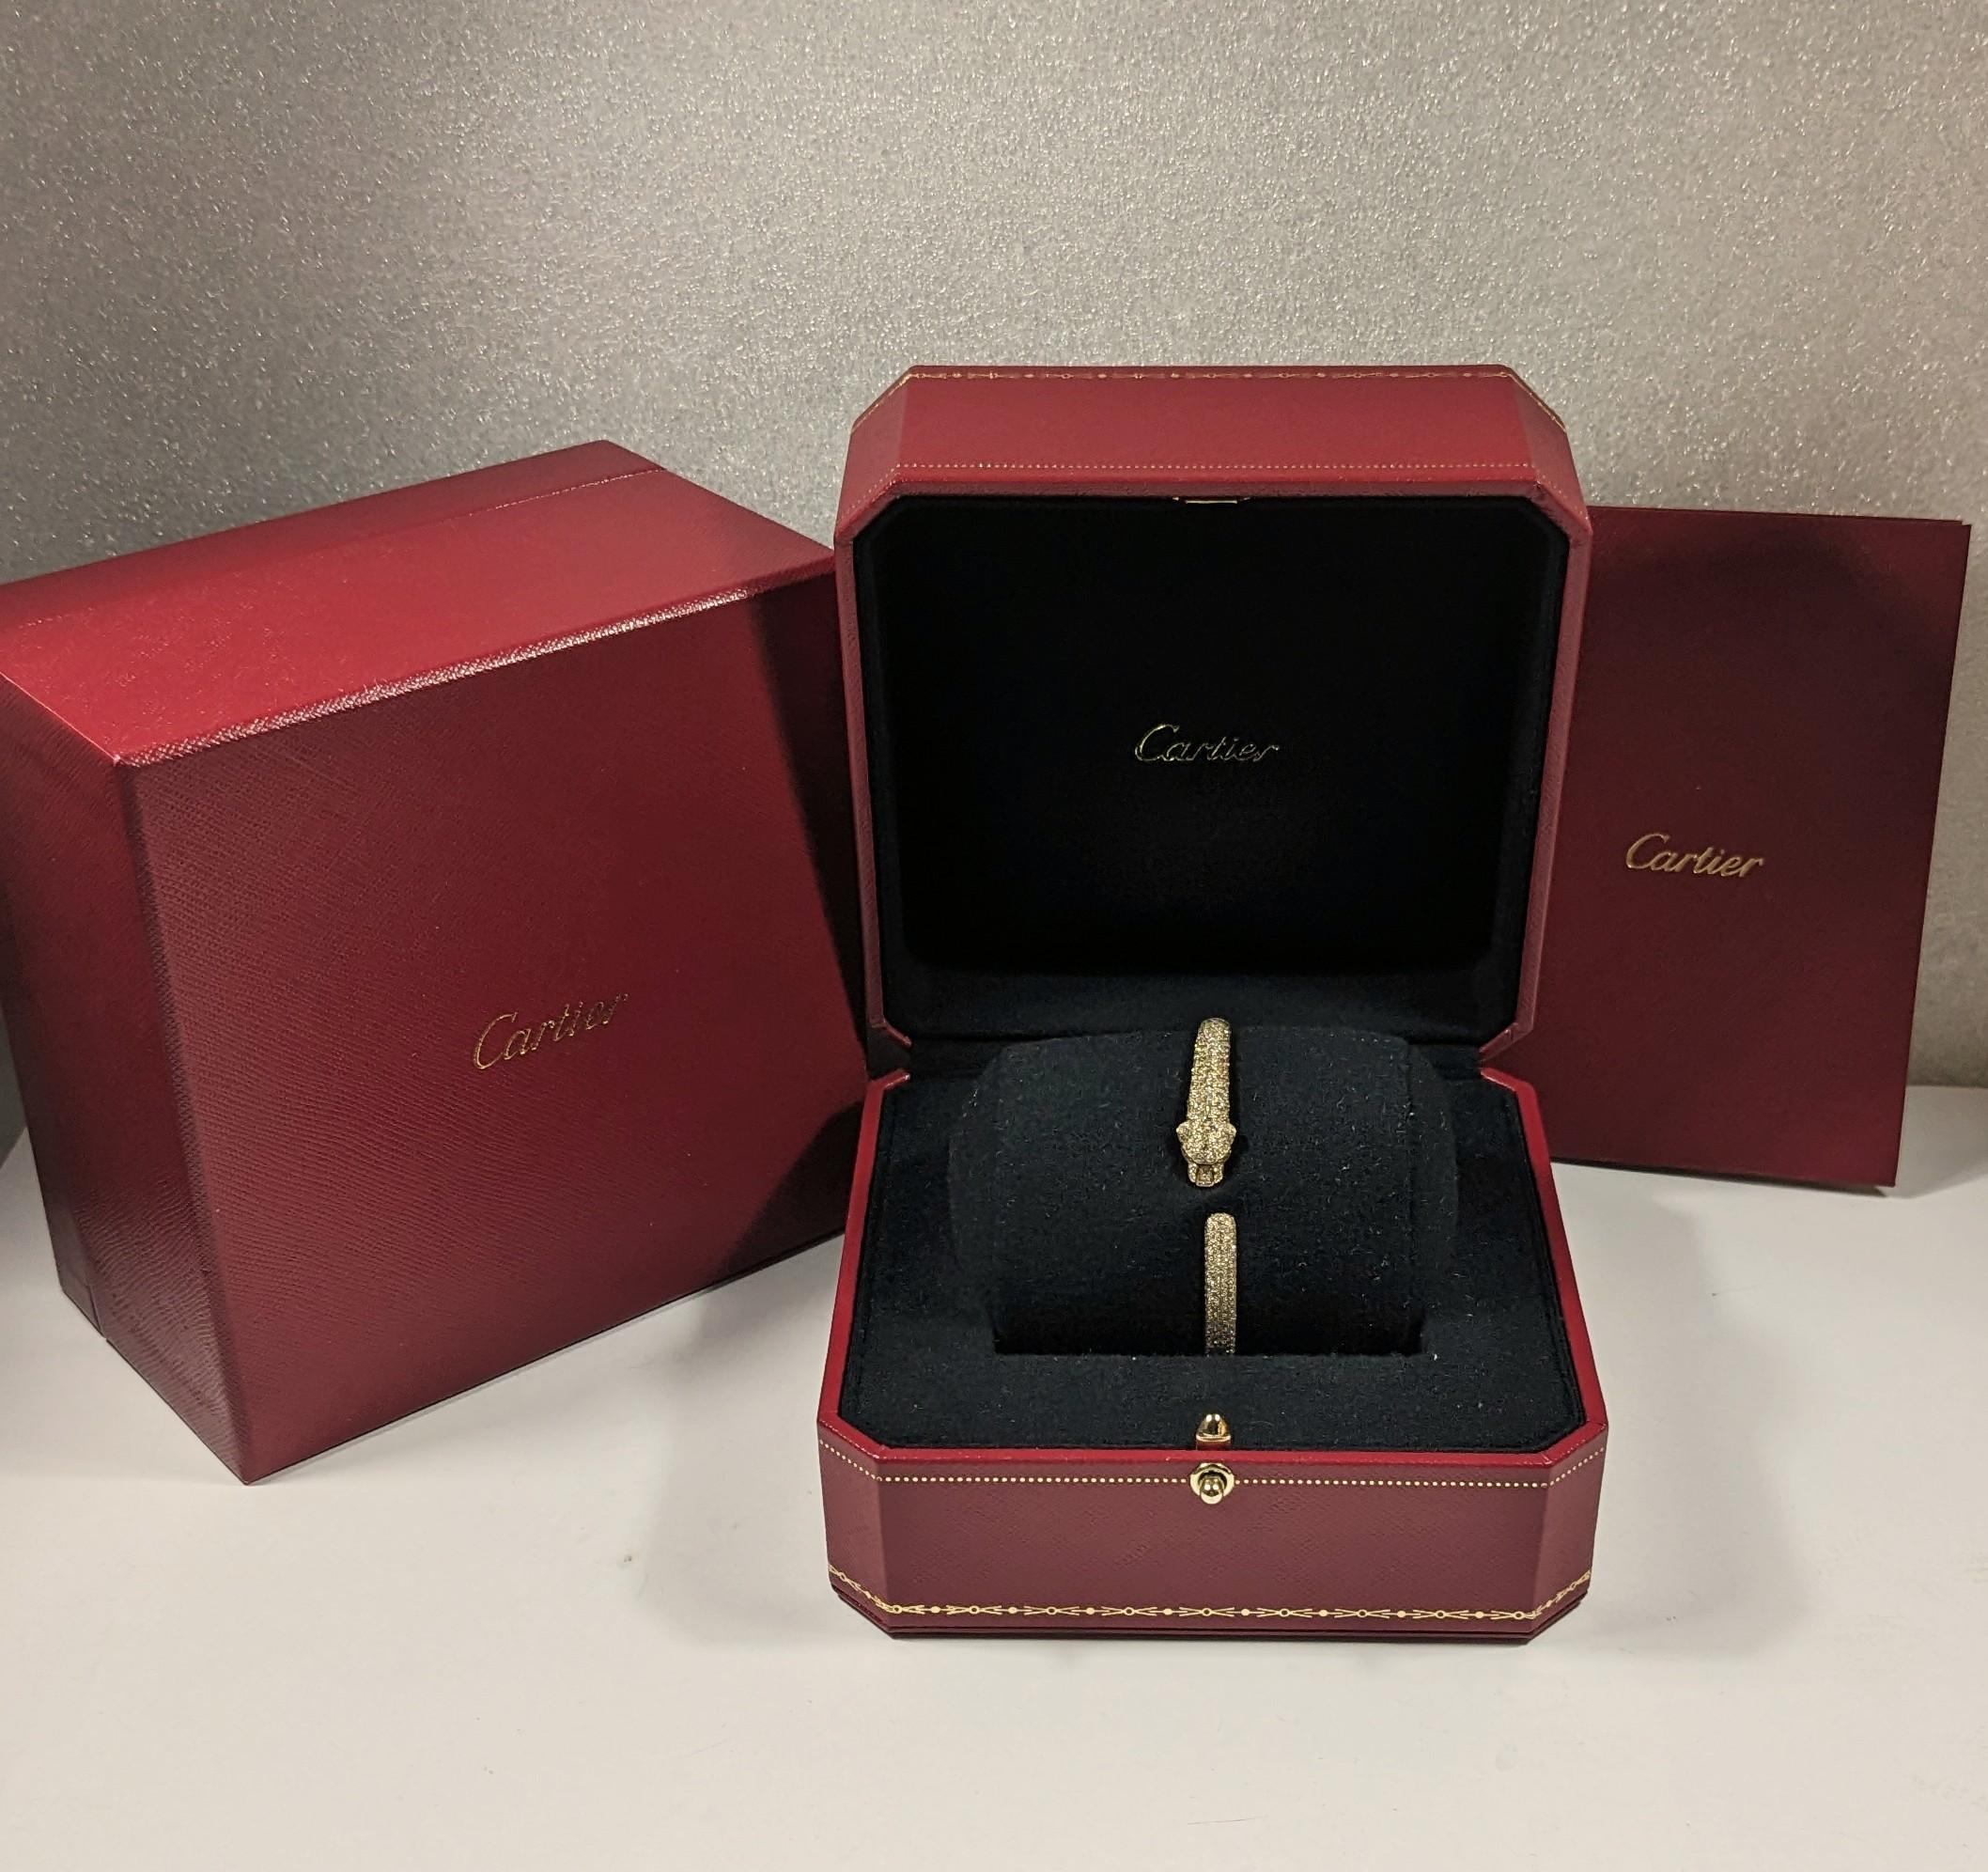 Brilliant Cut Cartier Panthere Bracelet in 18k  Gold, emerald, onyx & Diamonds with box For Sale